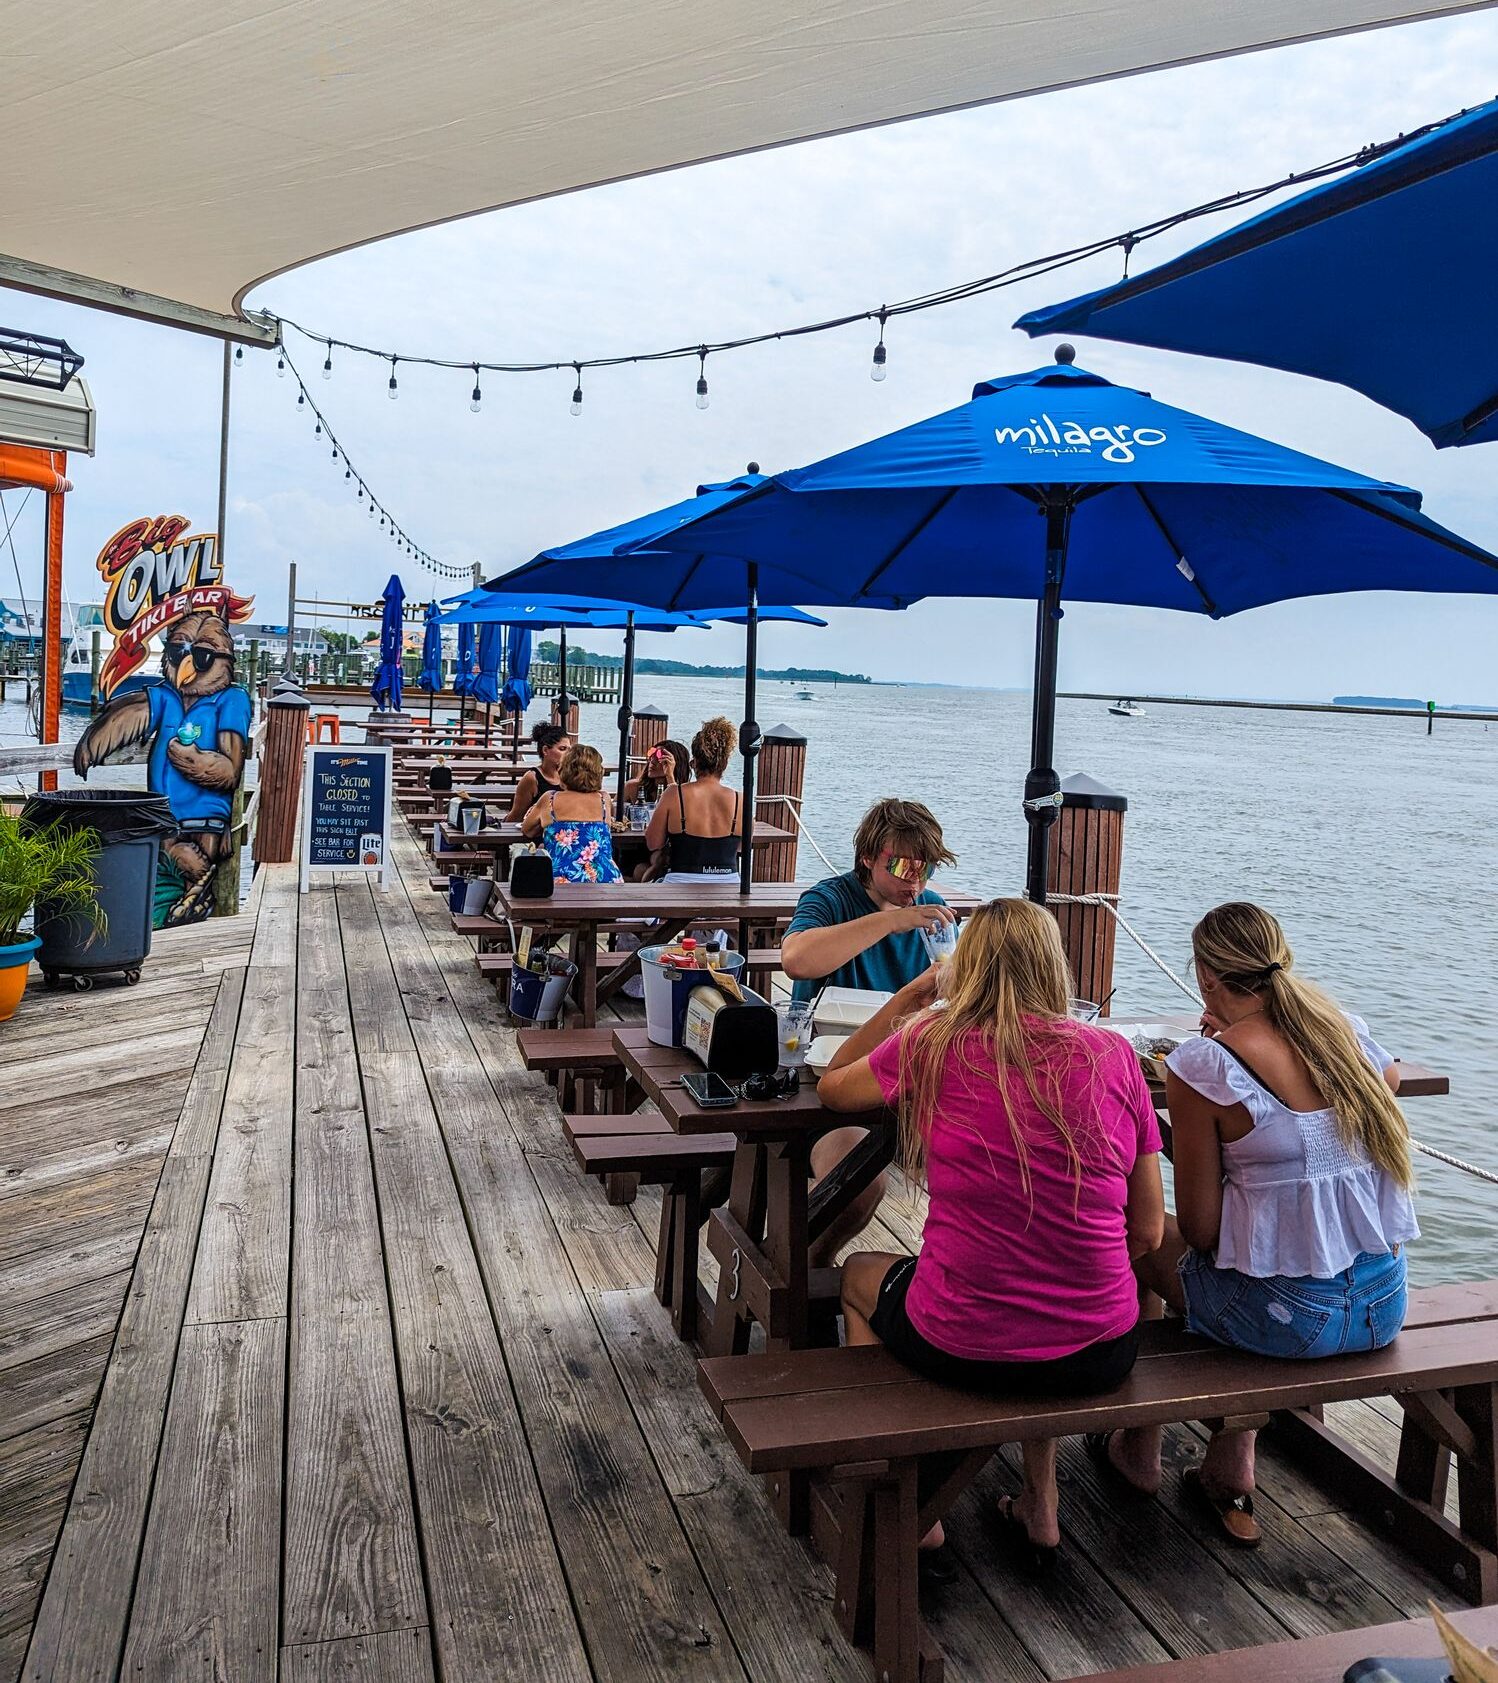 Customers dining and enjoying the outdoor deck on the water at Big Owl Tiki Bar.